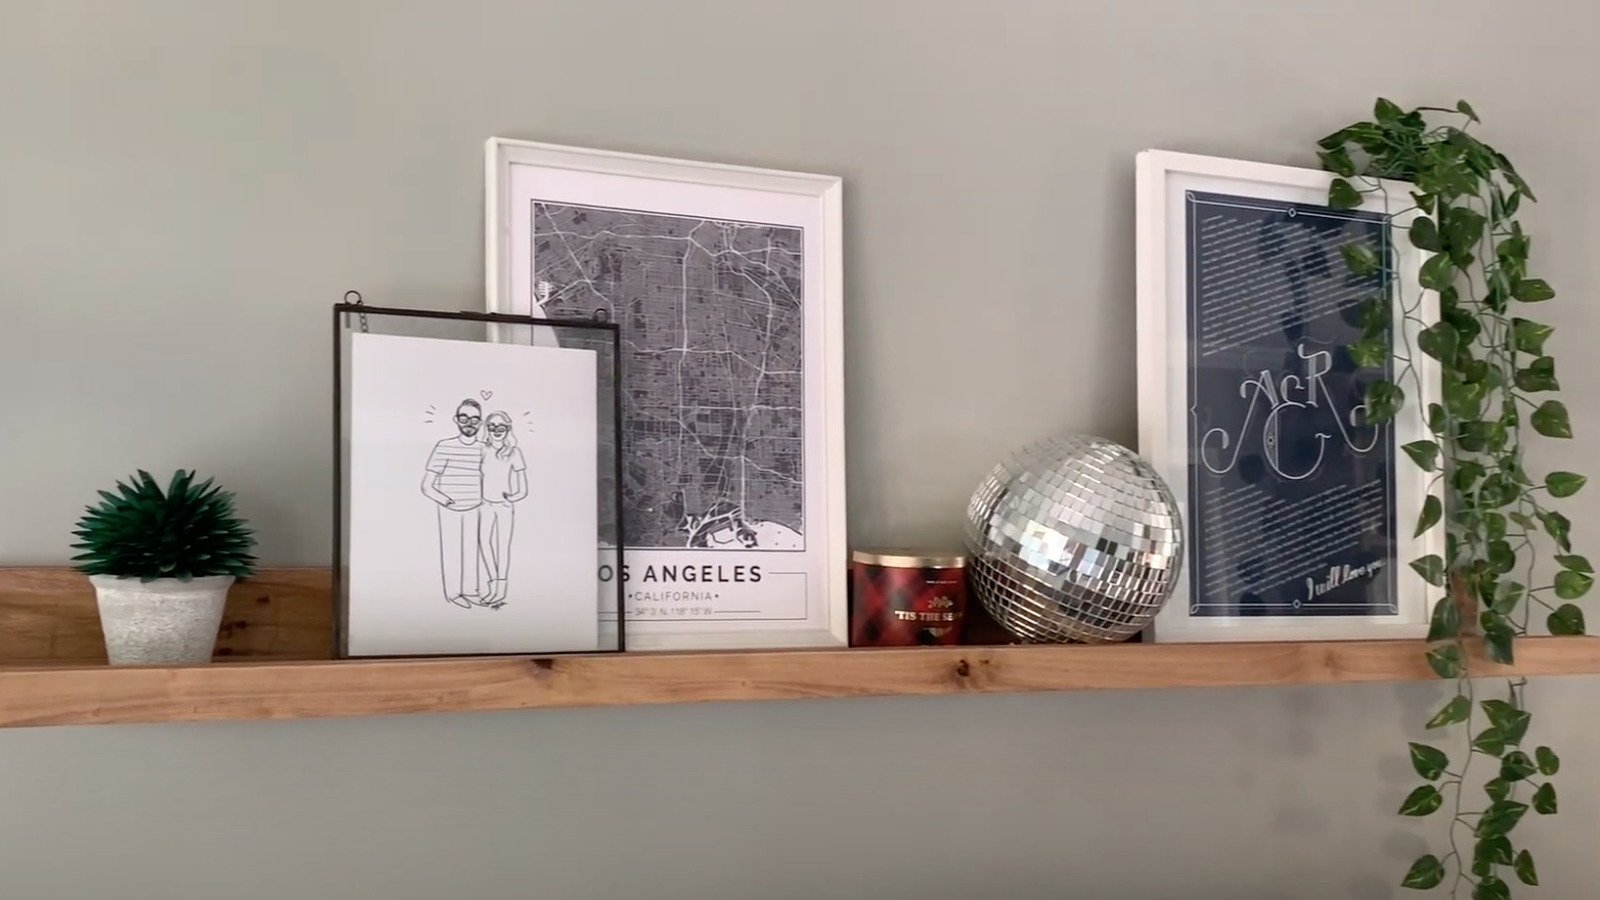 Picture Ledge Inspiration That Will Change The Way You Display Your Art